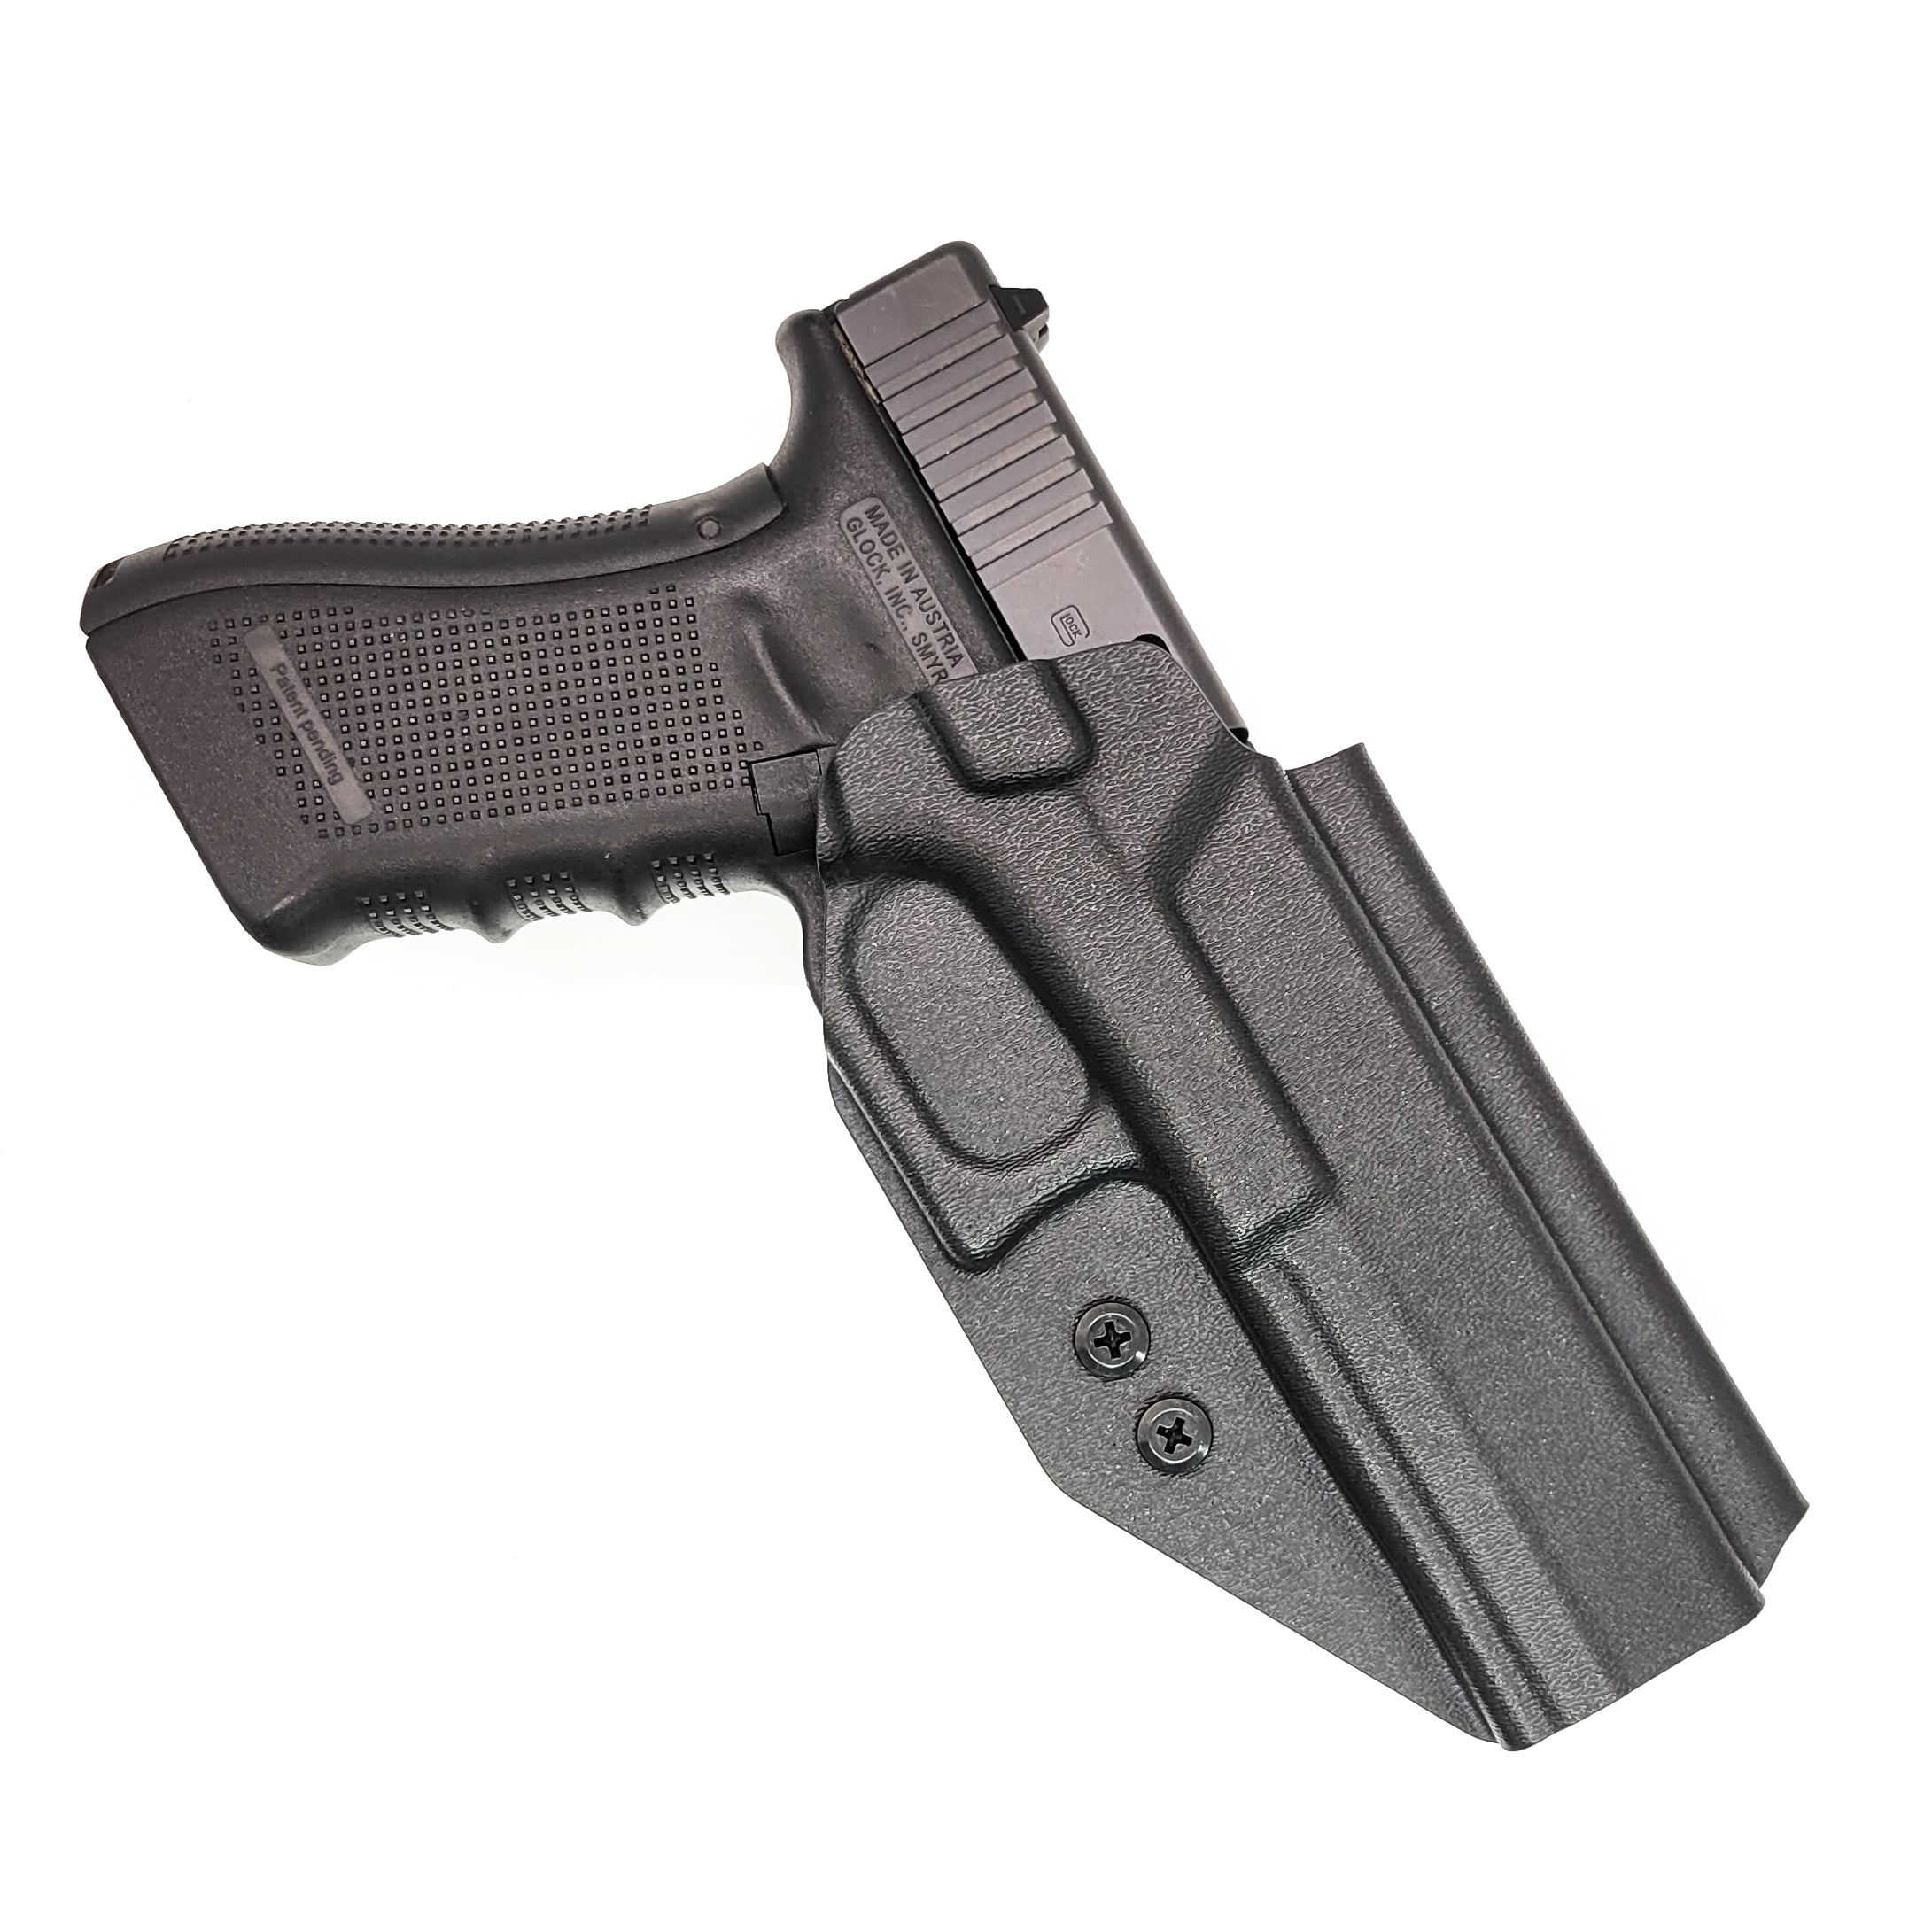 For the best outside waistband OWB holster for the Glock 34 Generation Gen 5, shop Four Brothers Holsters. Glock Gen 3 & 4 22, 17 MOS, Gen 3, 4 & 5 19, 23, 45 9mm Glock full size 9mm and 40 S&W frame pistols. The holster is cleared for a red dot sight. Adjustable Retention, molded with .080" Kydex, made in the USA.